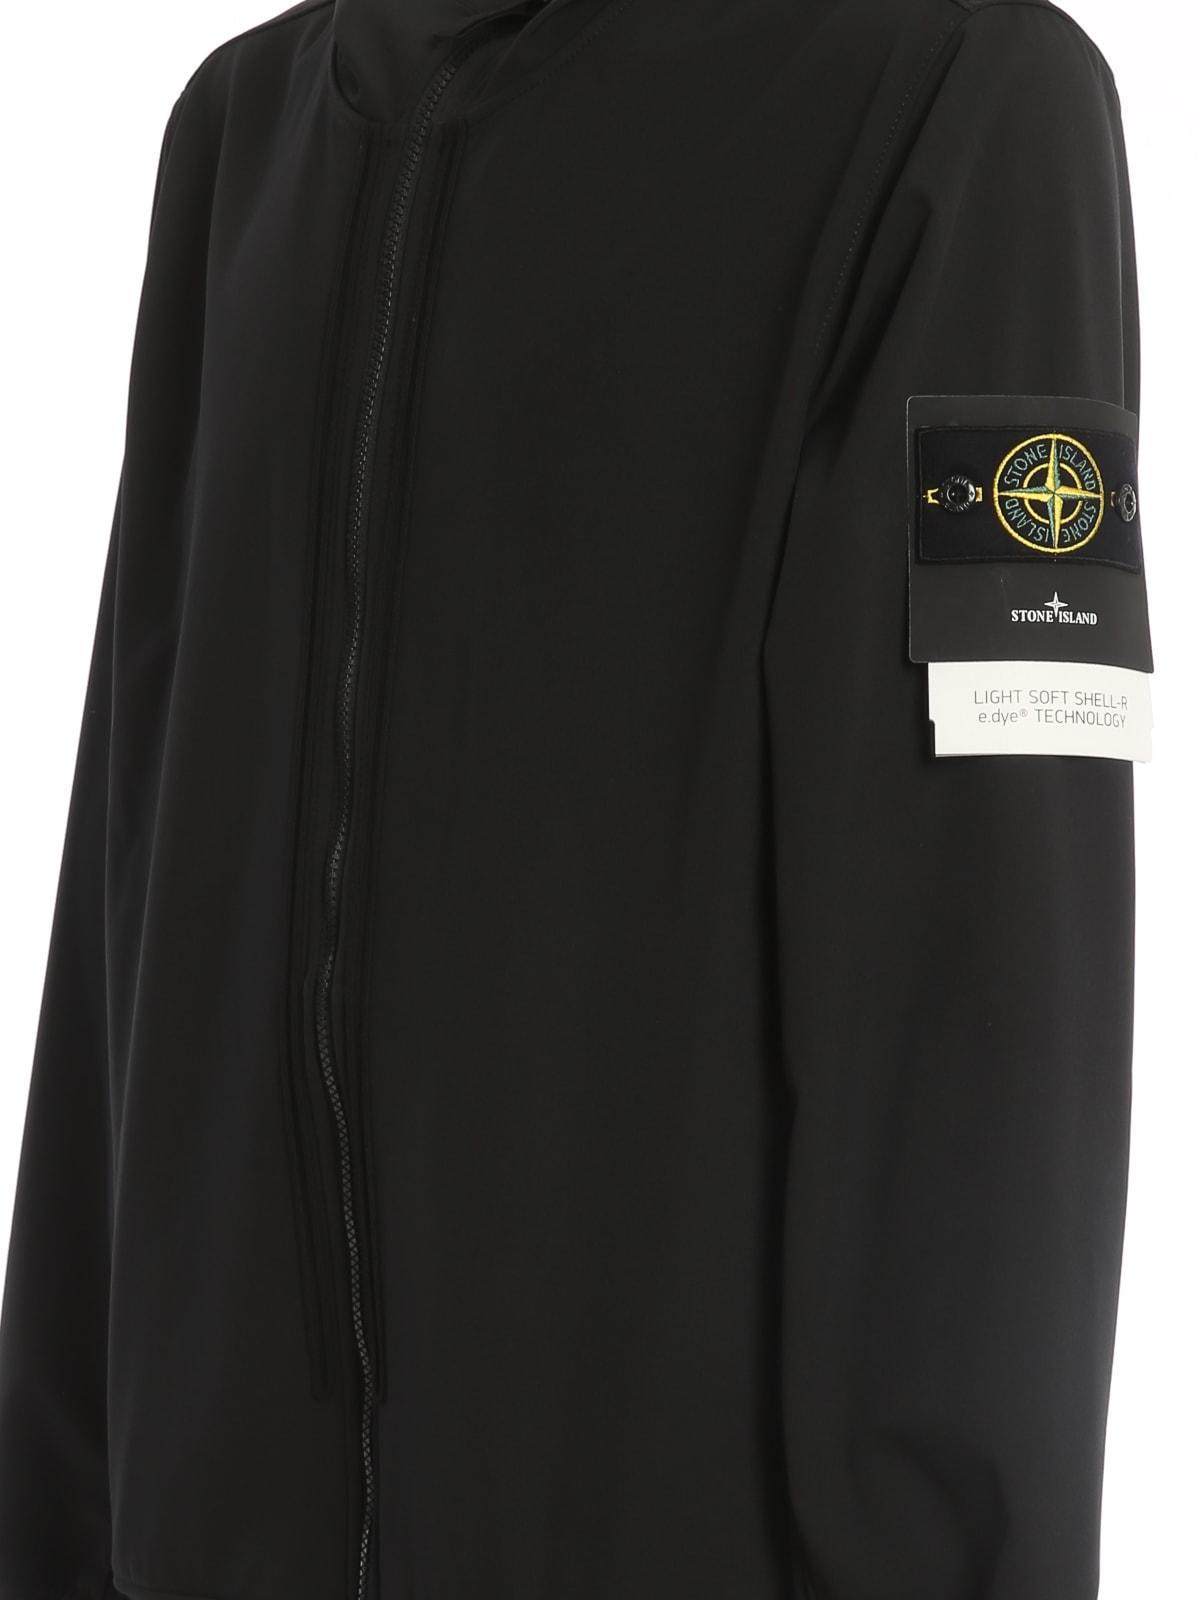 Stone Island Soft Shell Jacket in Black for Men | Lyst